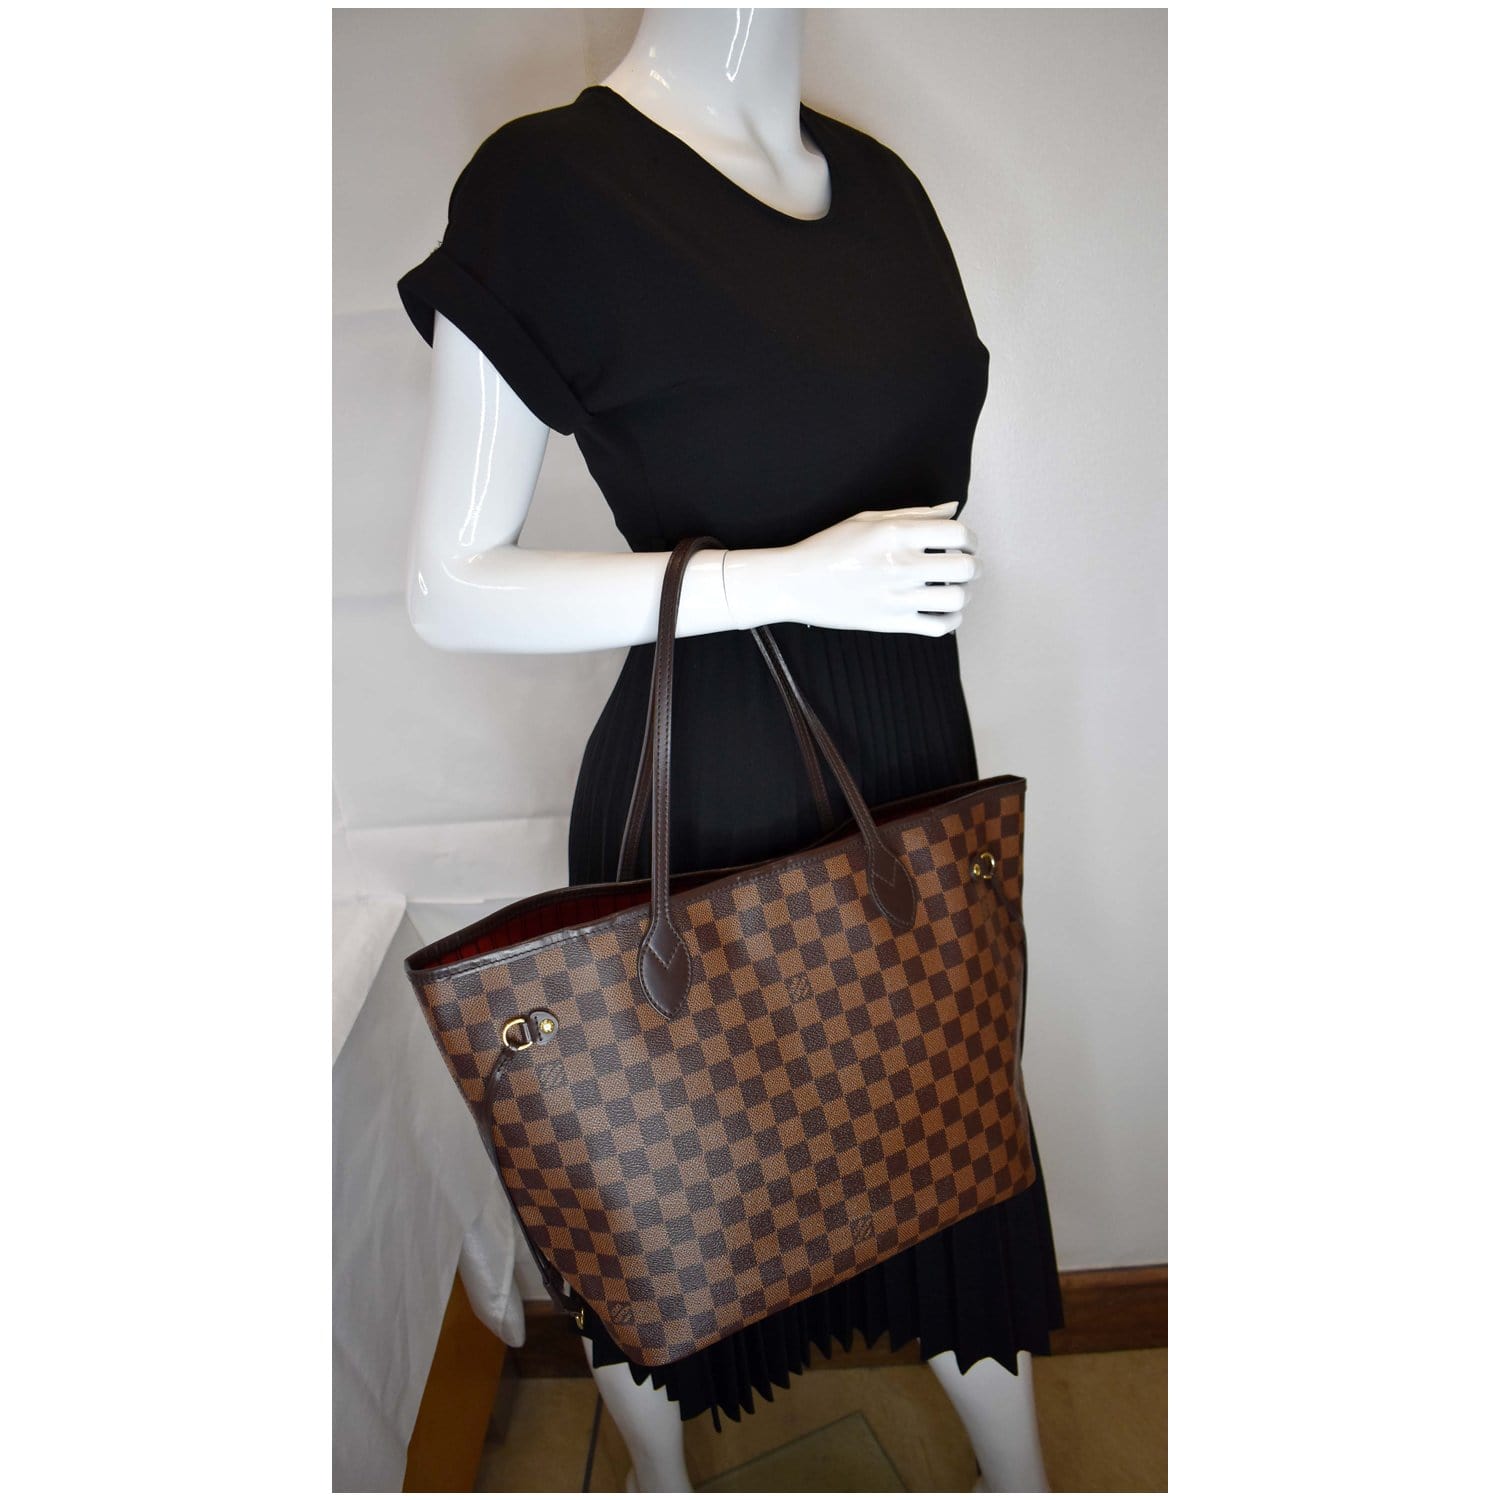 LOUIS VUITTON Damier Neverfull MM Tote 2014